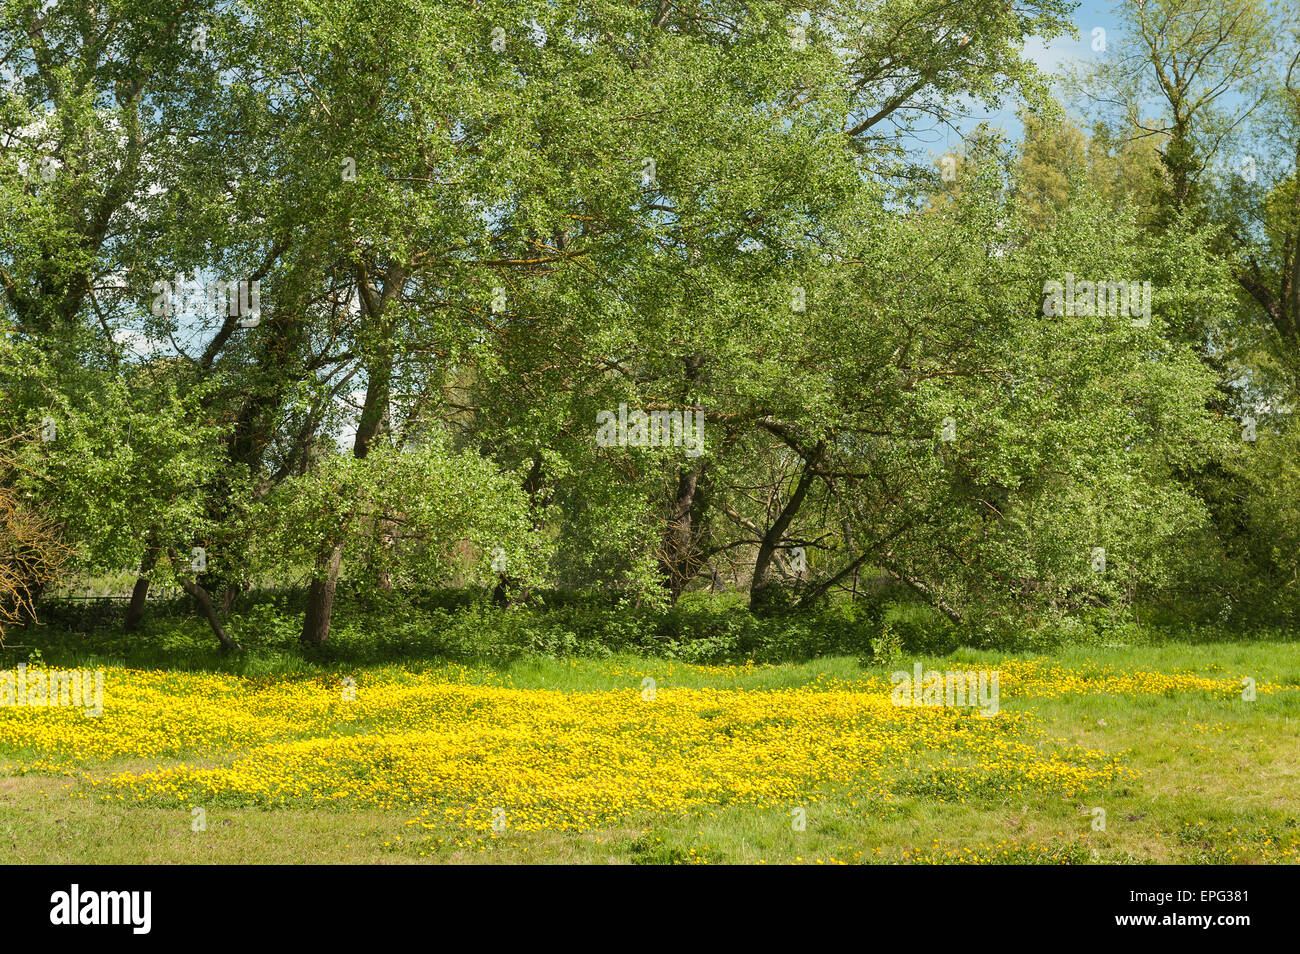 typical British country side paddock of buttercups against border of willow trees typical of dreamy summer days Sutton at Hone Stock Photo